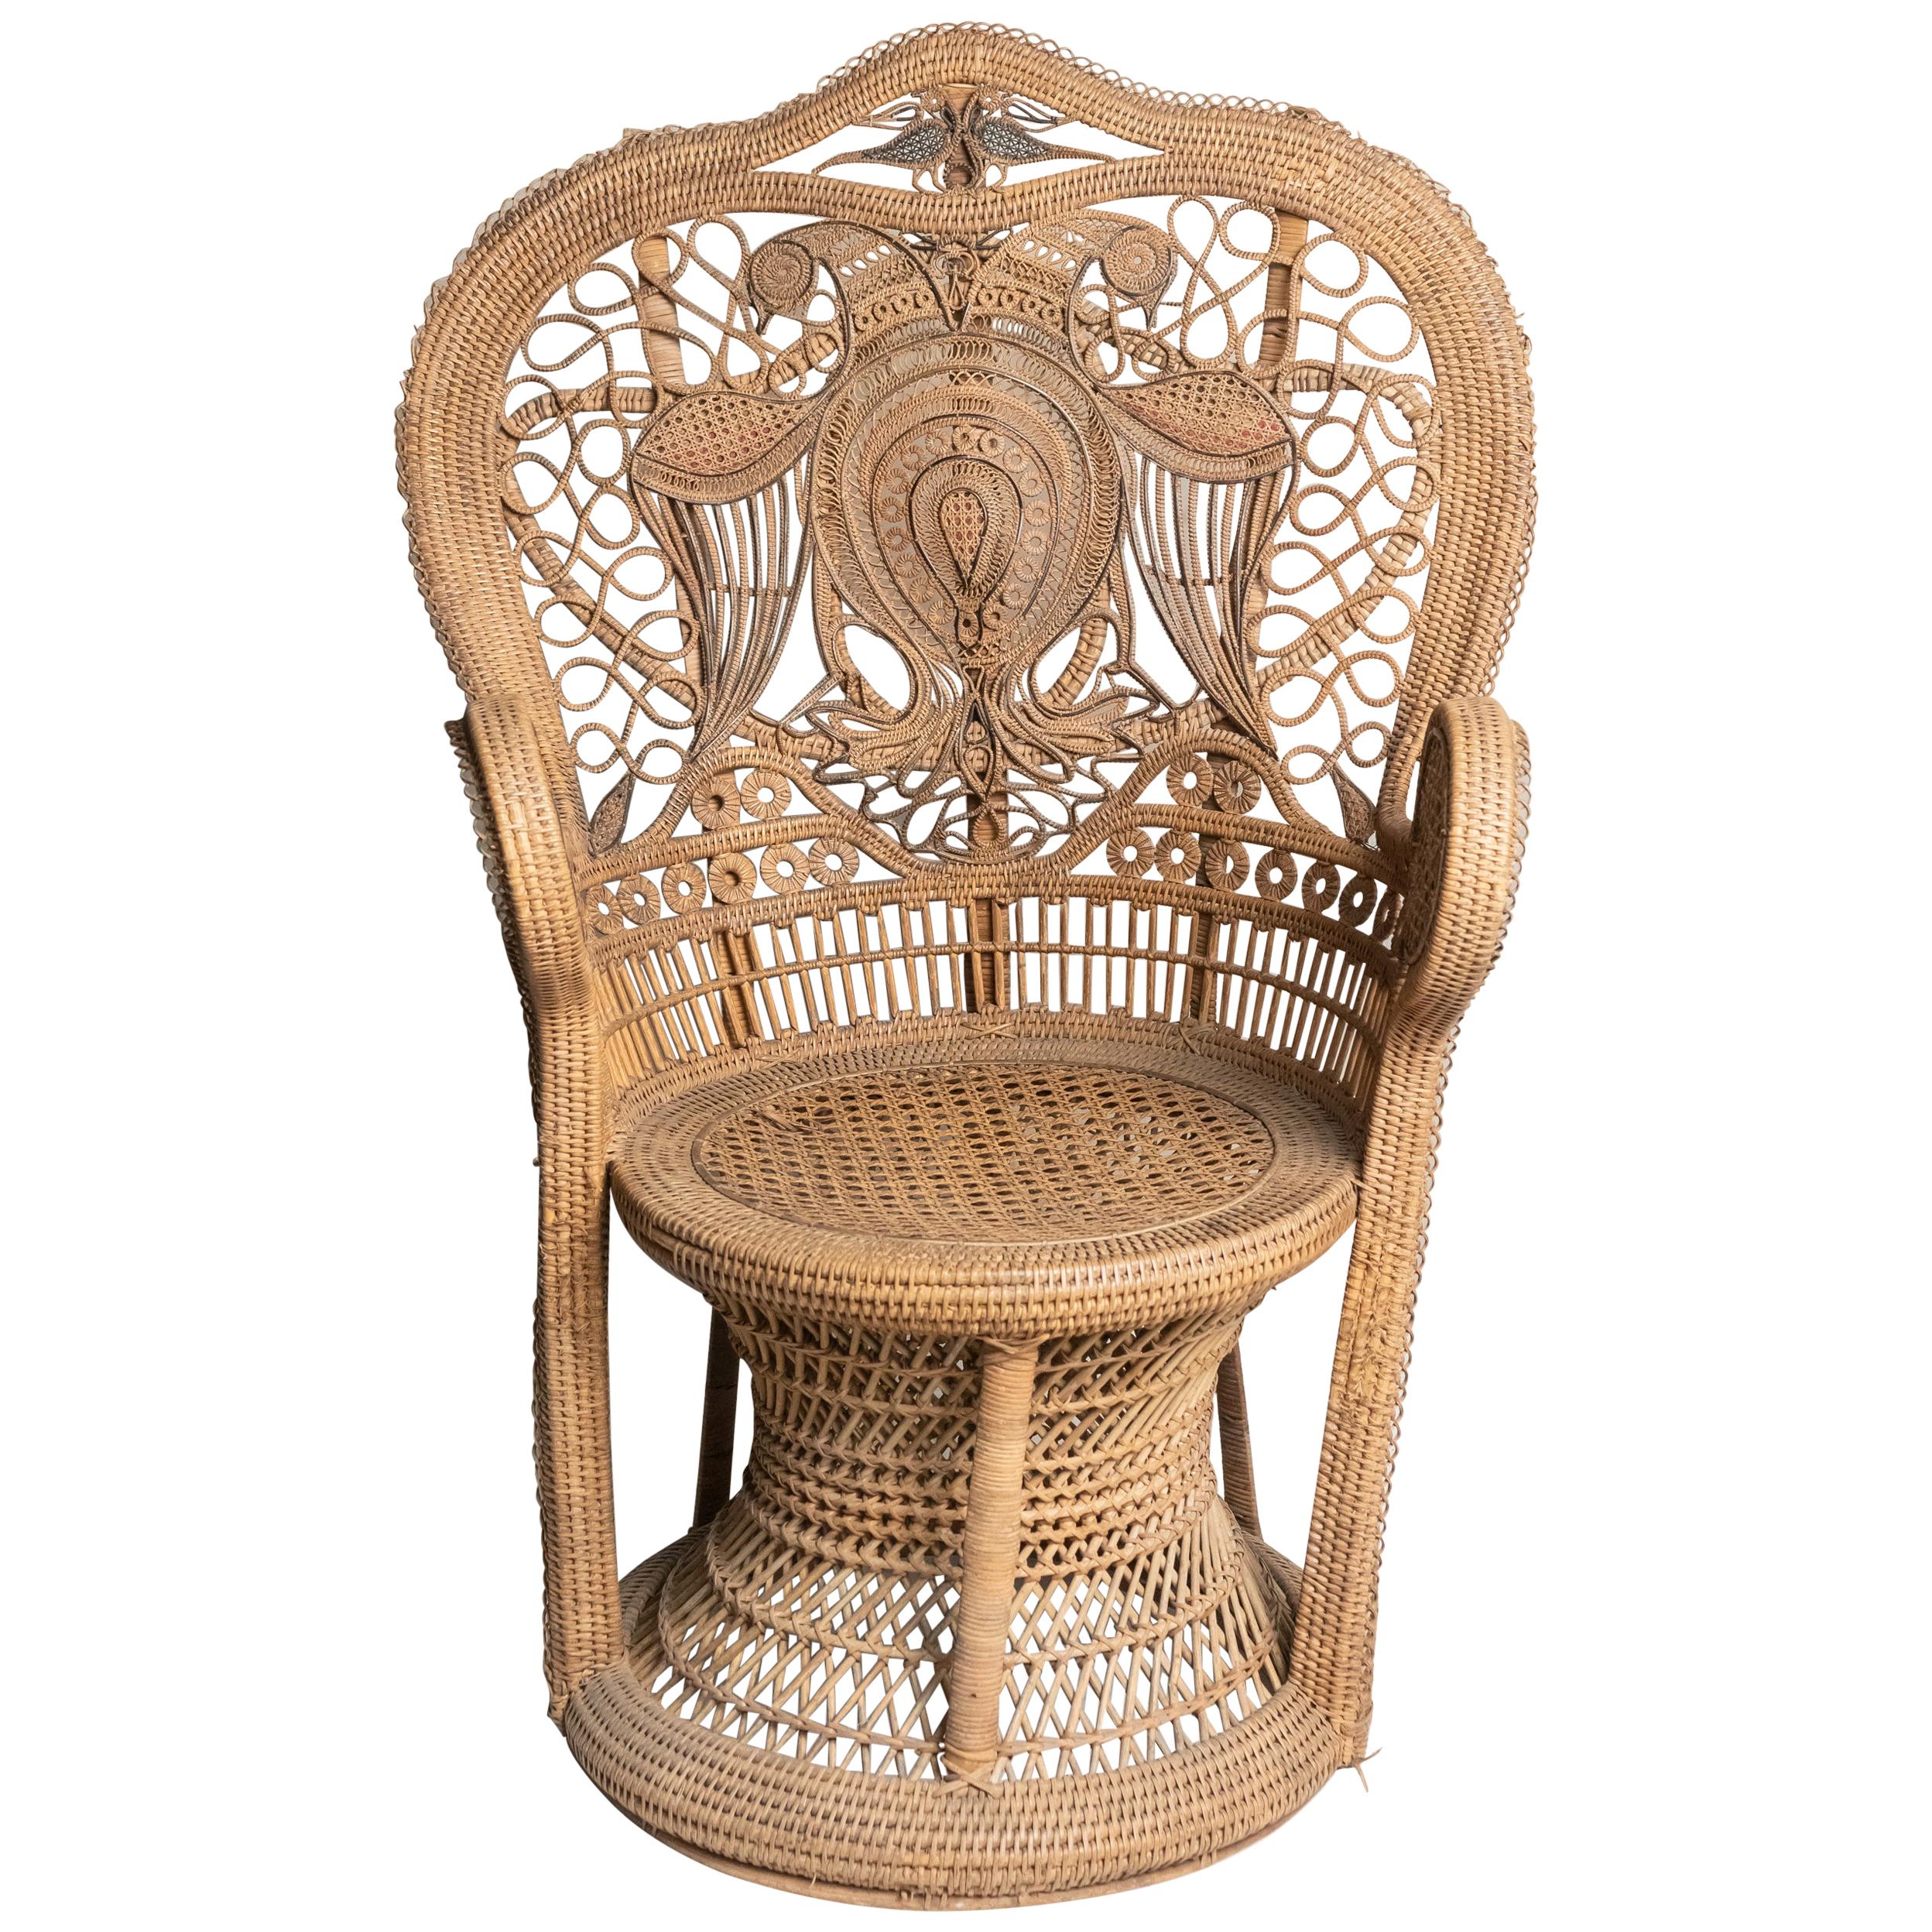 What year was rattan popular?